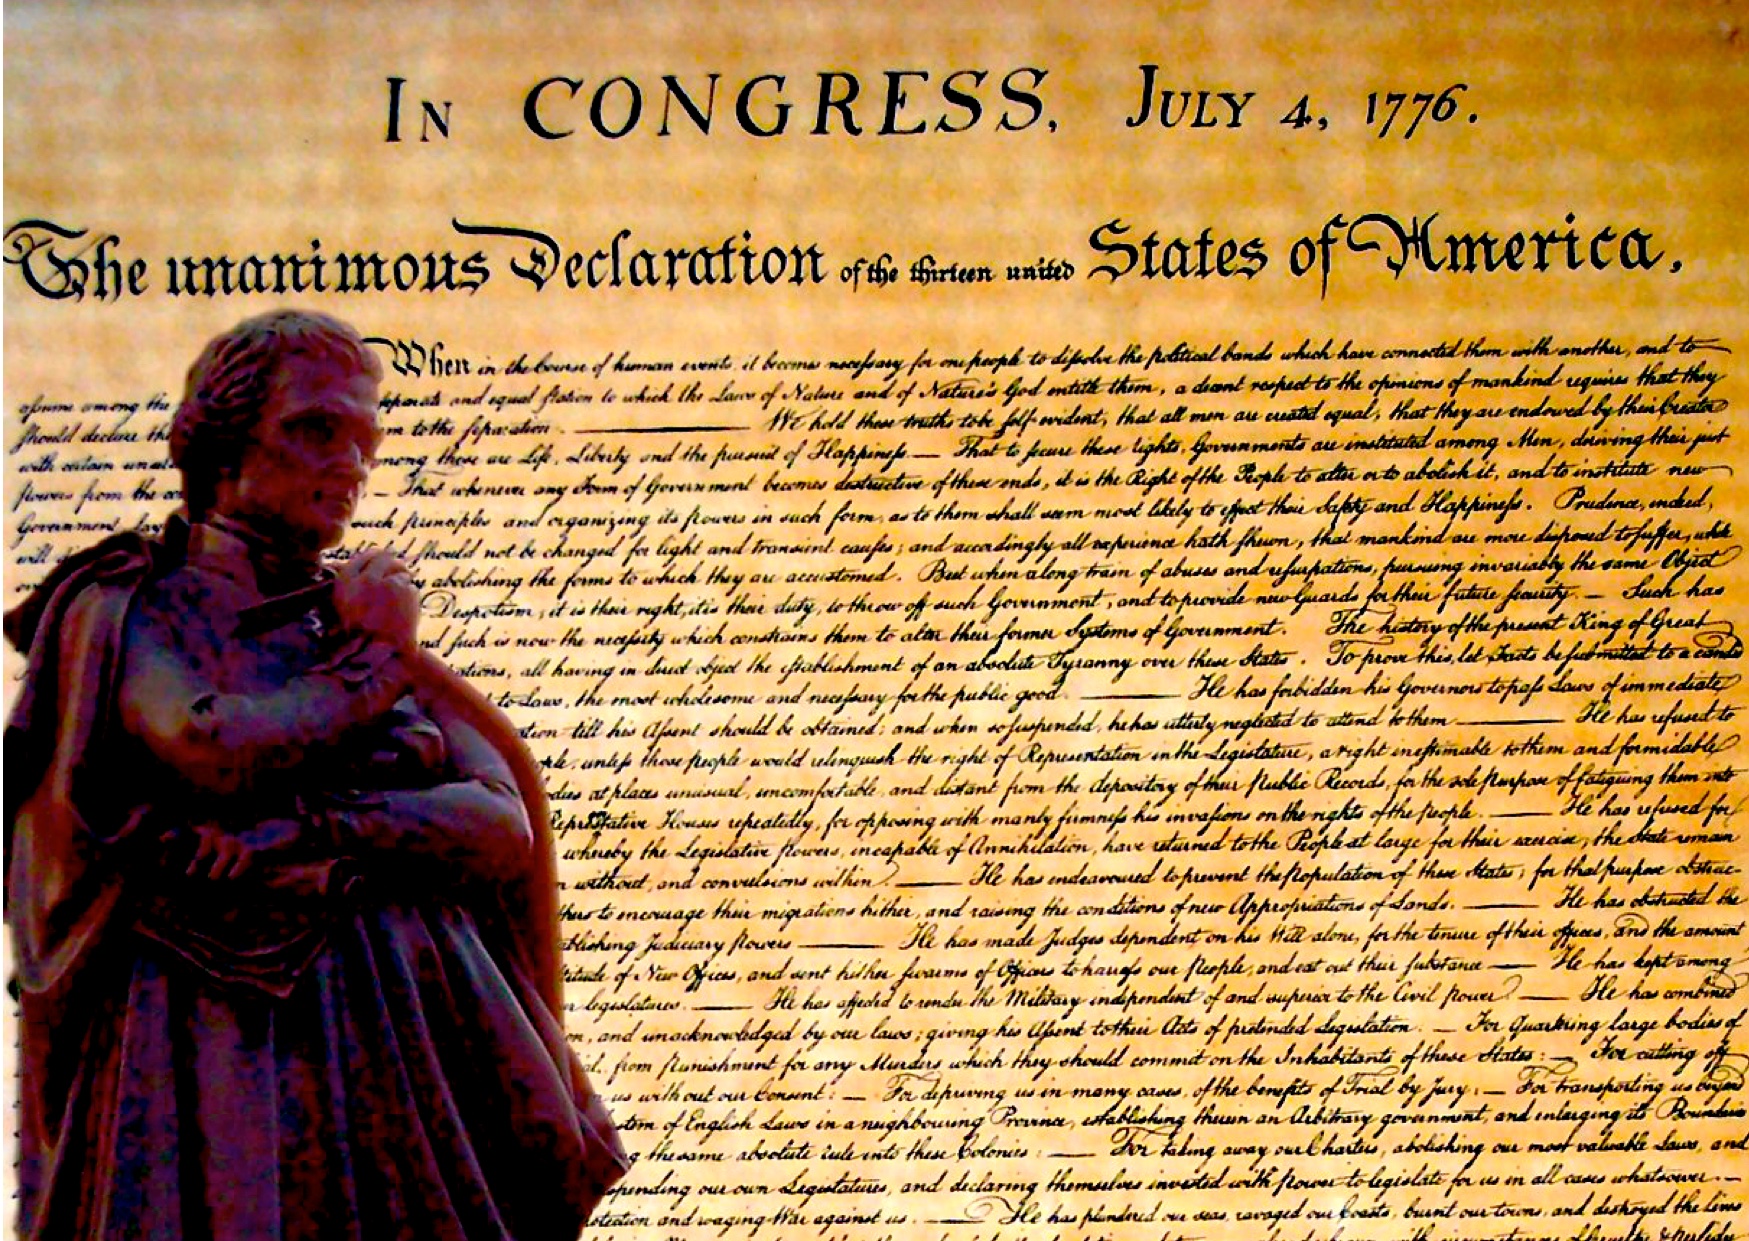 An icon of human freedom, The U.S. Declaration of Independence, with its author Thomas Jefferson.